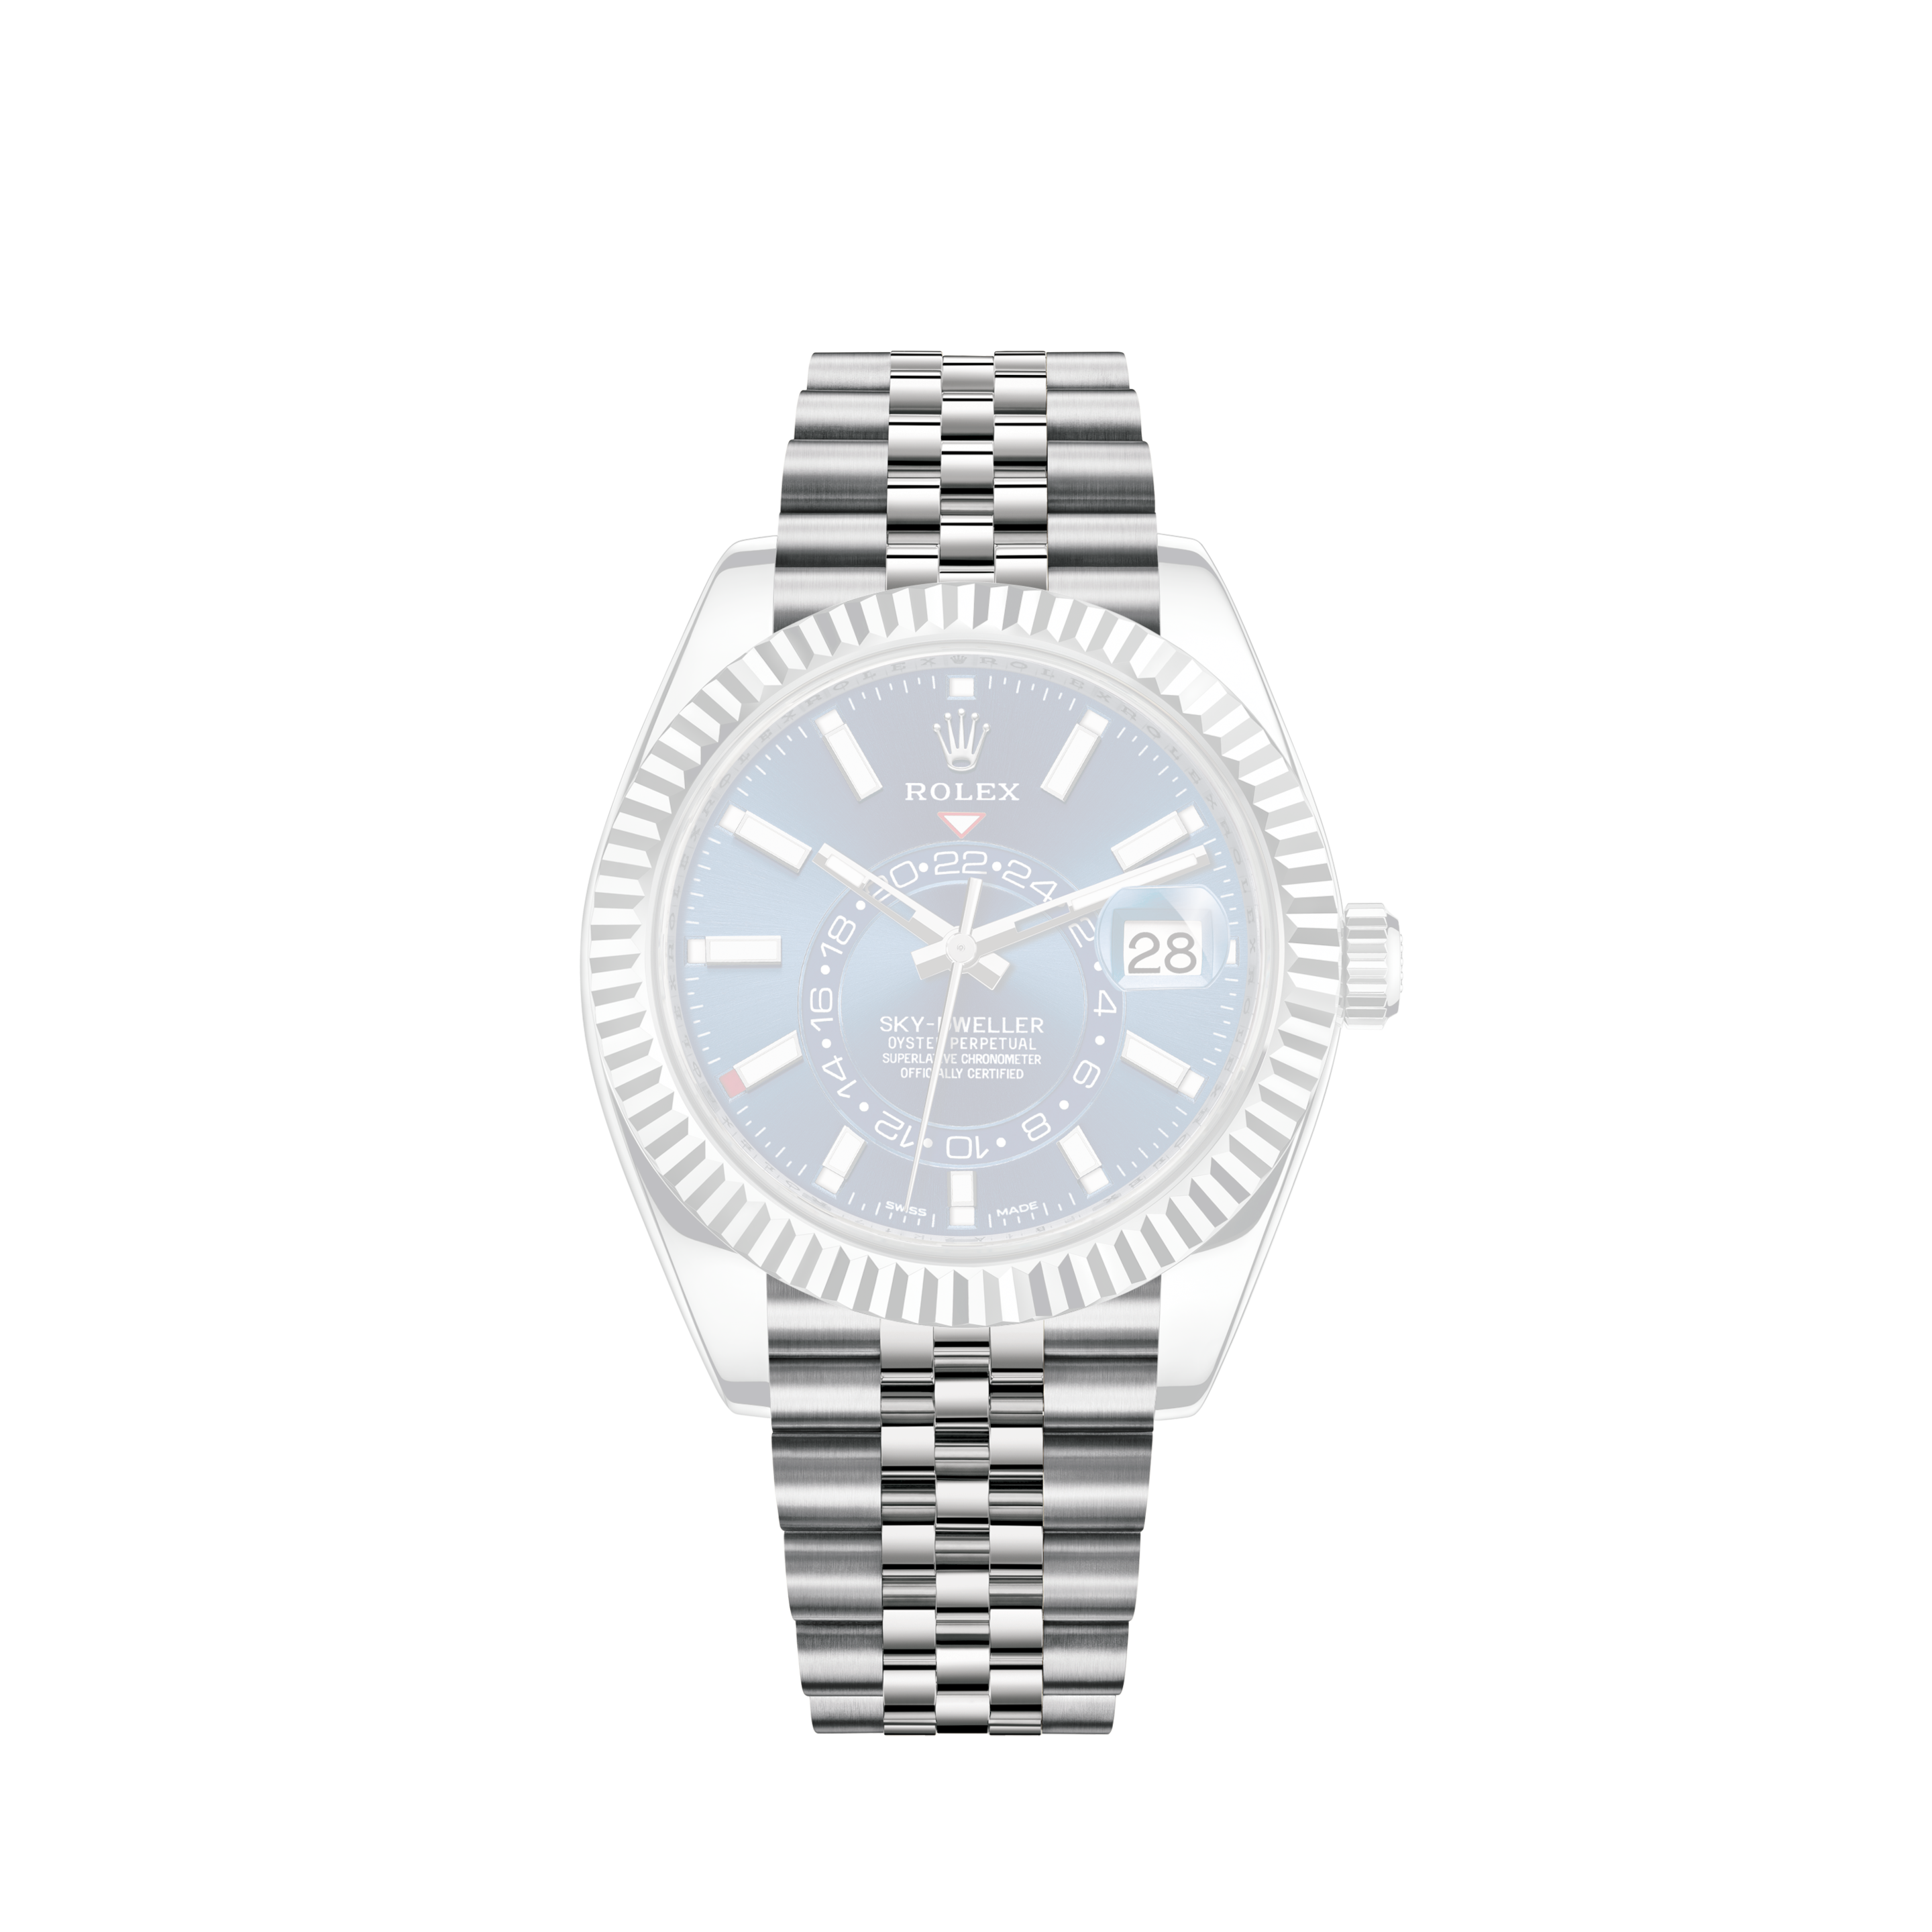 Rolex 36mm Datejust Discreet Jubilee Design White Dial with Diamonds Two Tone Jubilee Watch